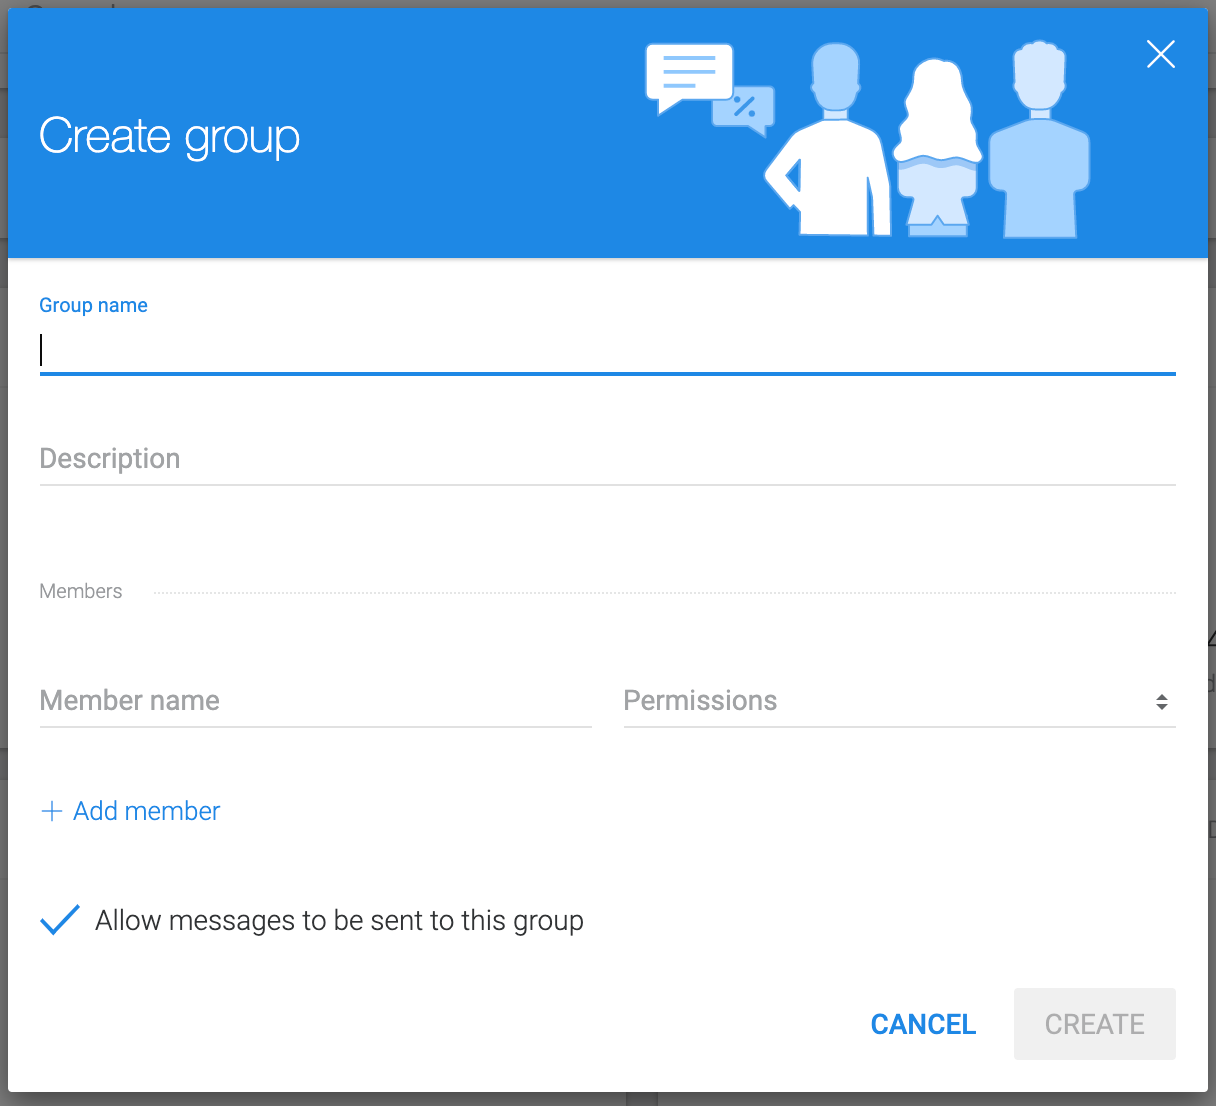 Create_group_modal.png